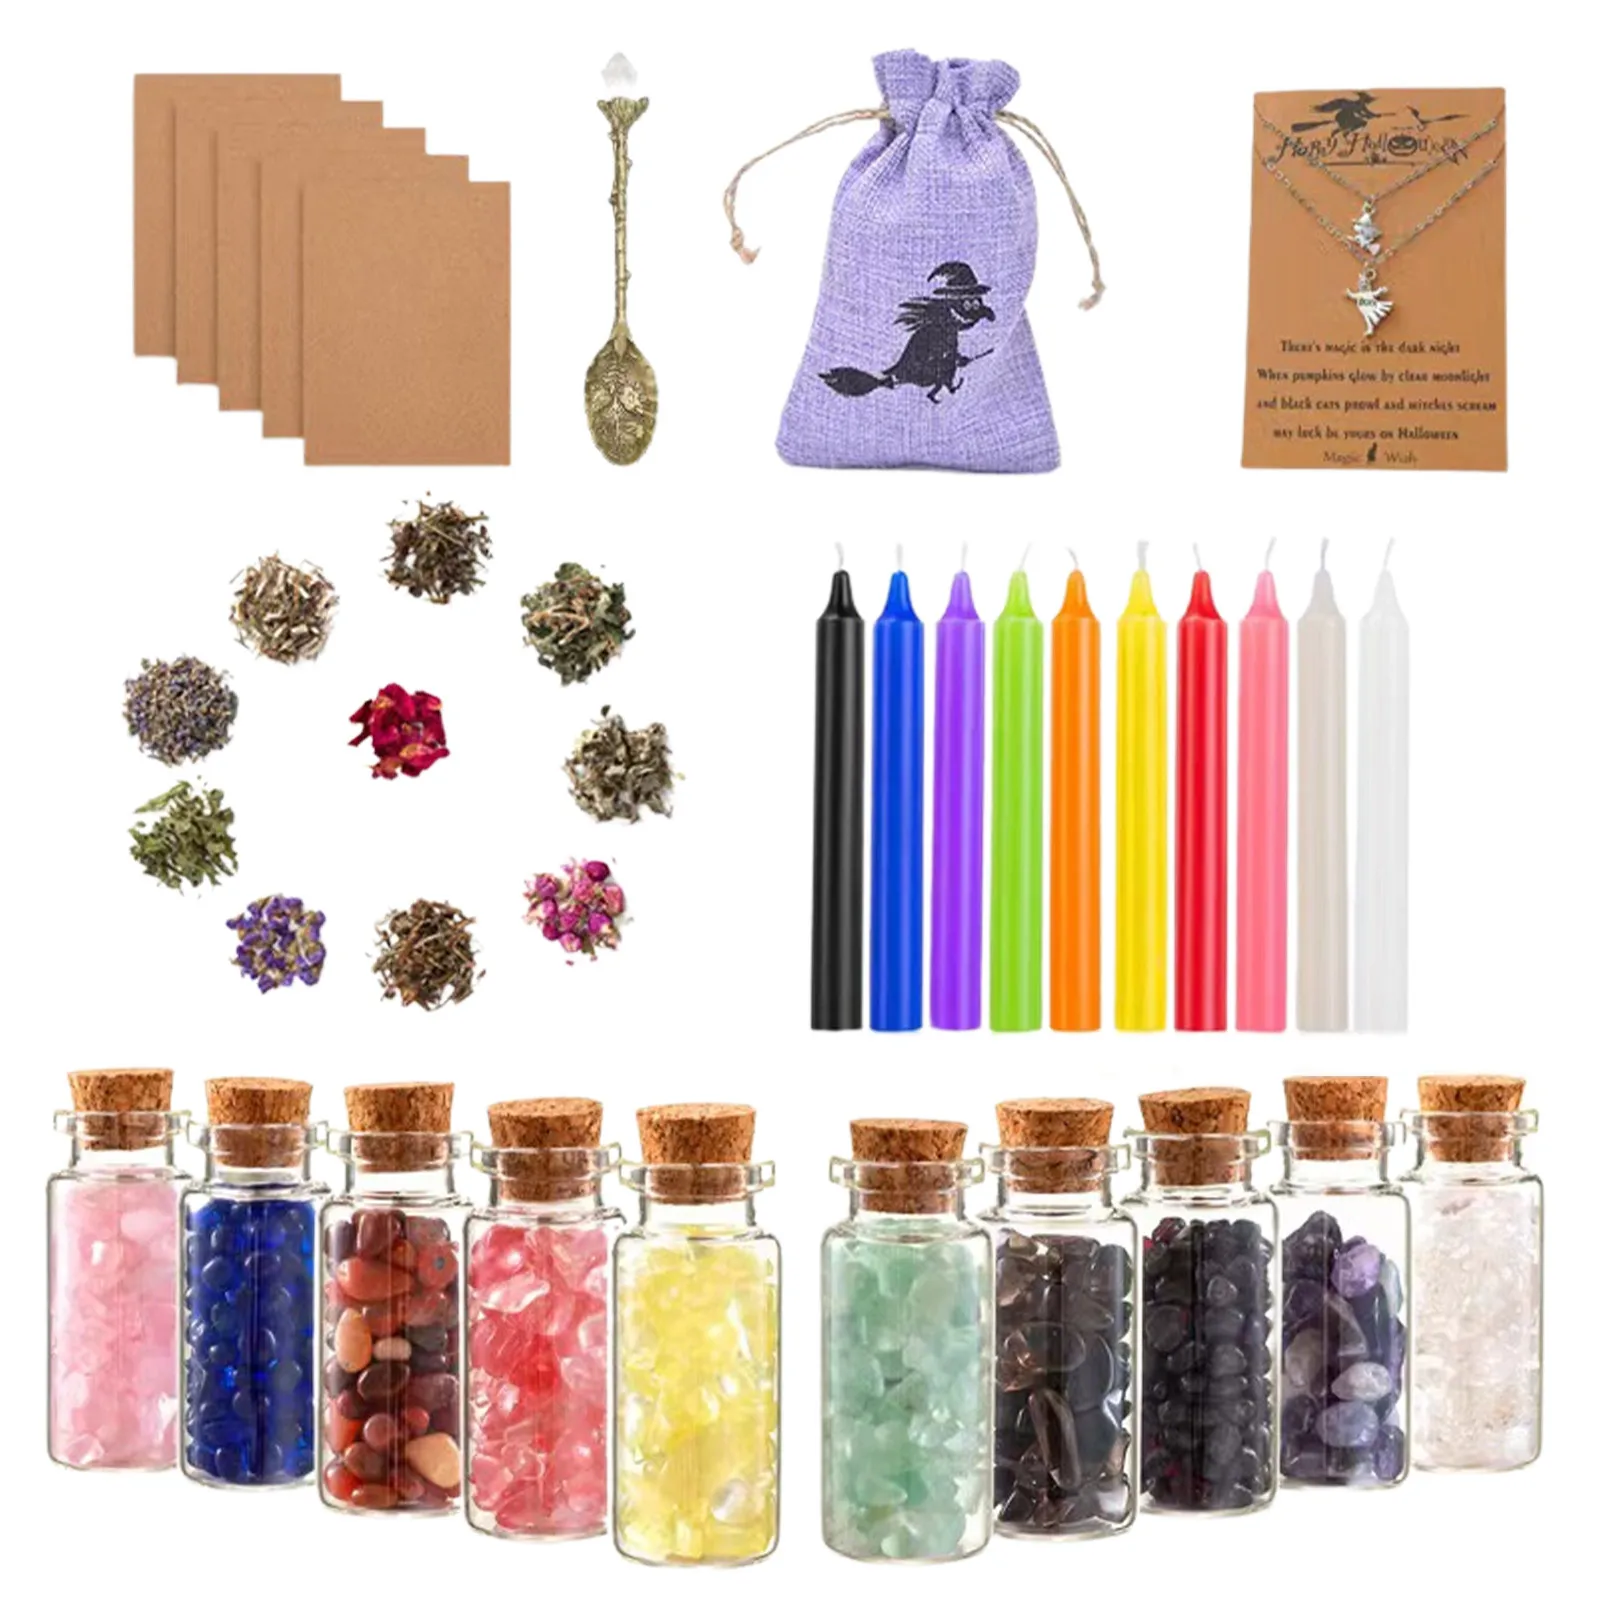 

New 2022 Witchcraft Supplies Kit for Witch Altar Witch Box With Dried Herbs Crystal Jars Colored Candles Parchment